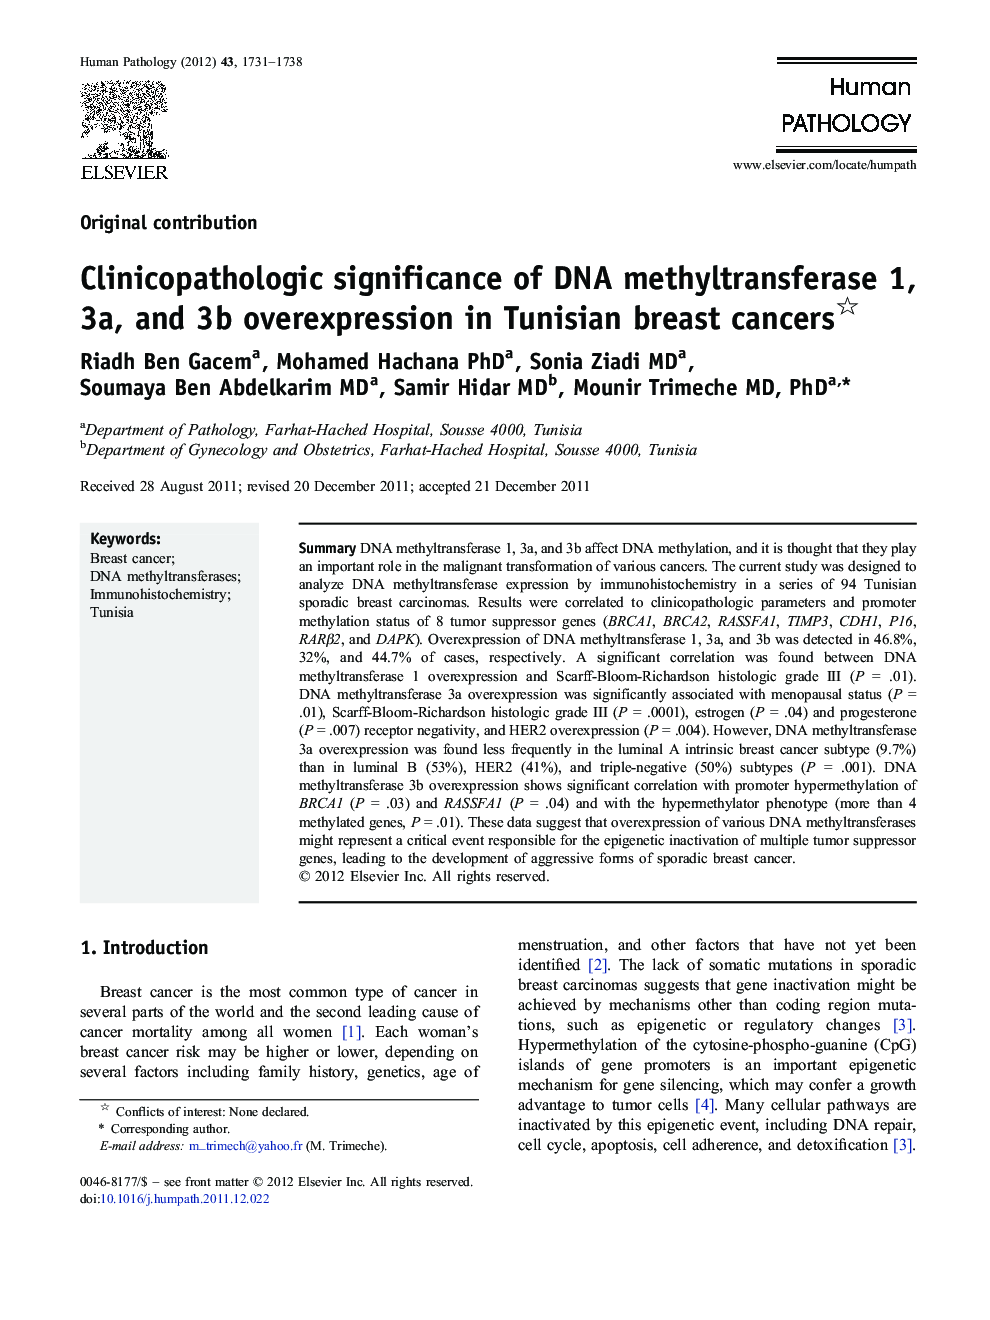 Clinicopathologic significance of DNA methyltransferase 1, 3a, and 3b overexpression in Tunisian breast cancers 